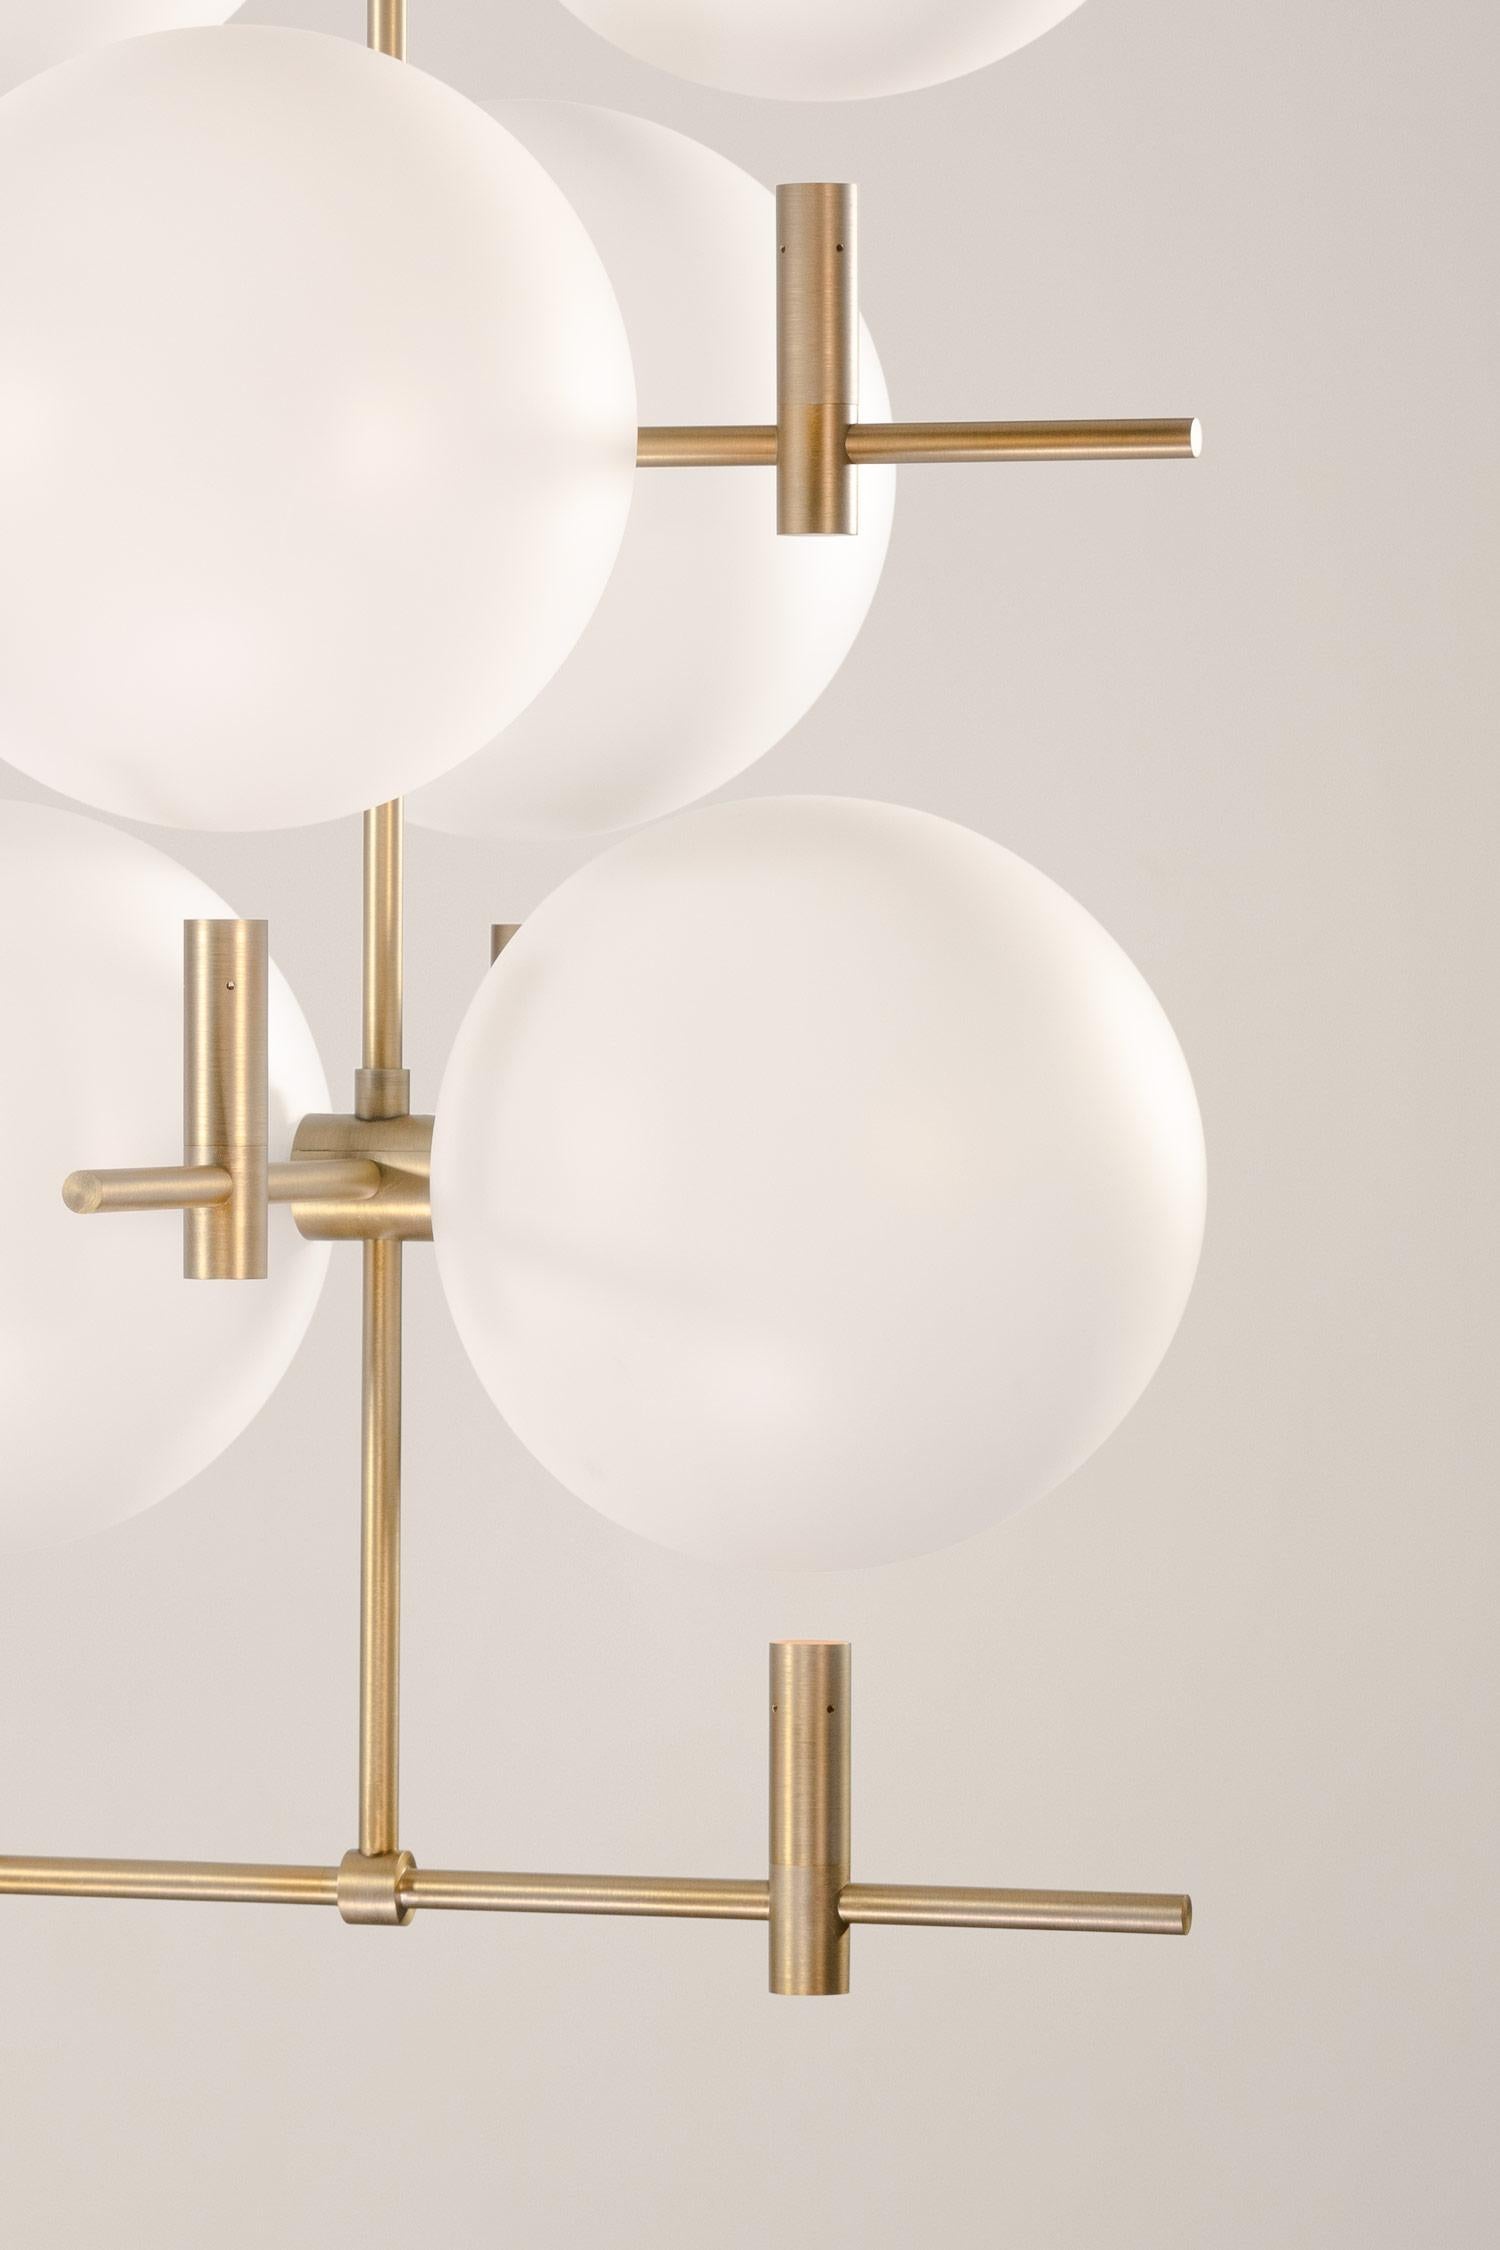 Czech Luna Luminaire / Chandelier Horizontal I02 in Brushed Gold For Sale